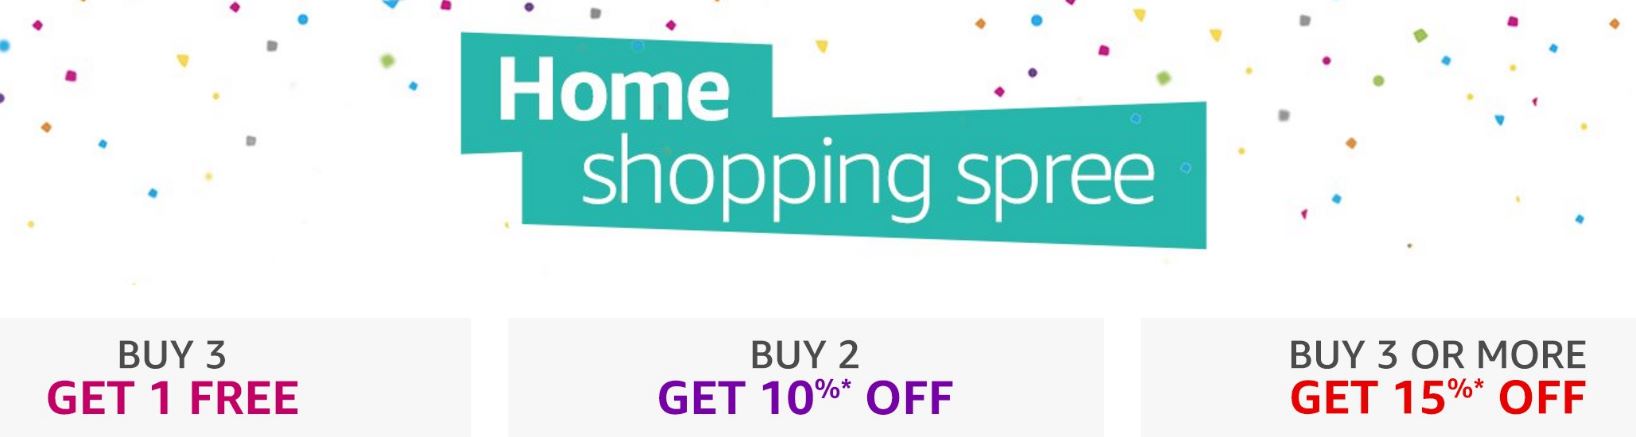 India Desire : Amazon Home Shopping Spree Sale 18th-19th February 2017 : Upto 60% Off + Extra 15% Off